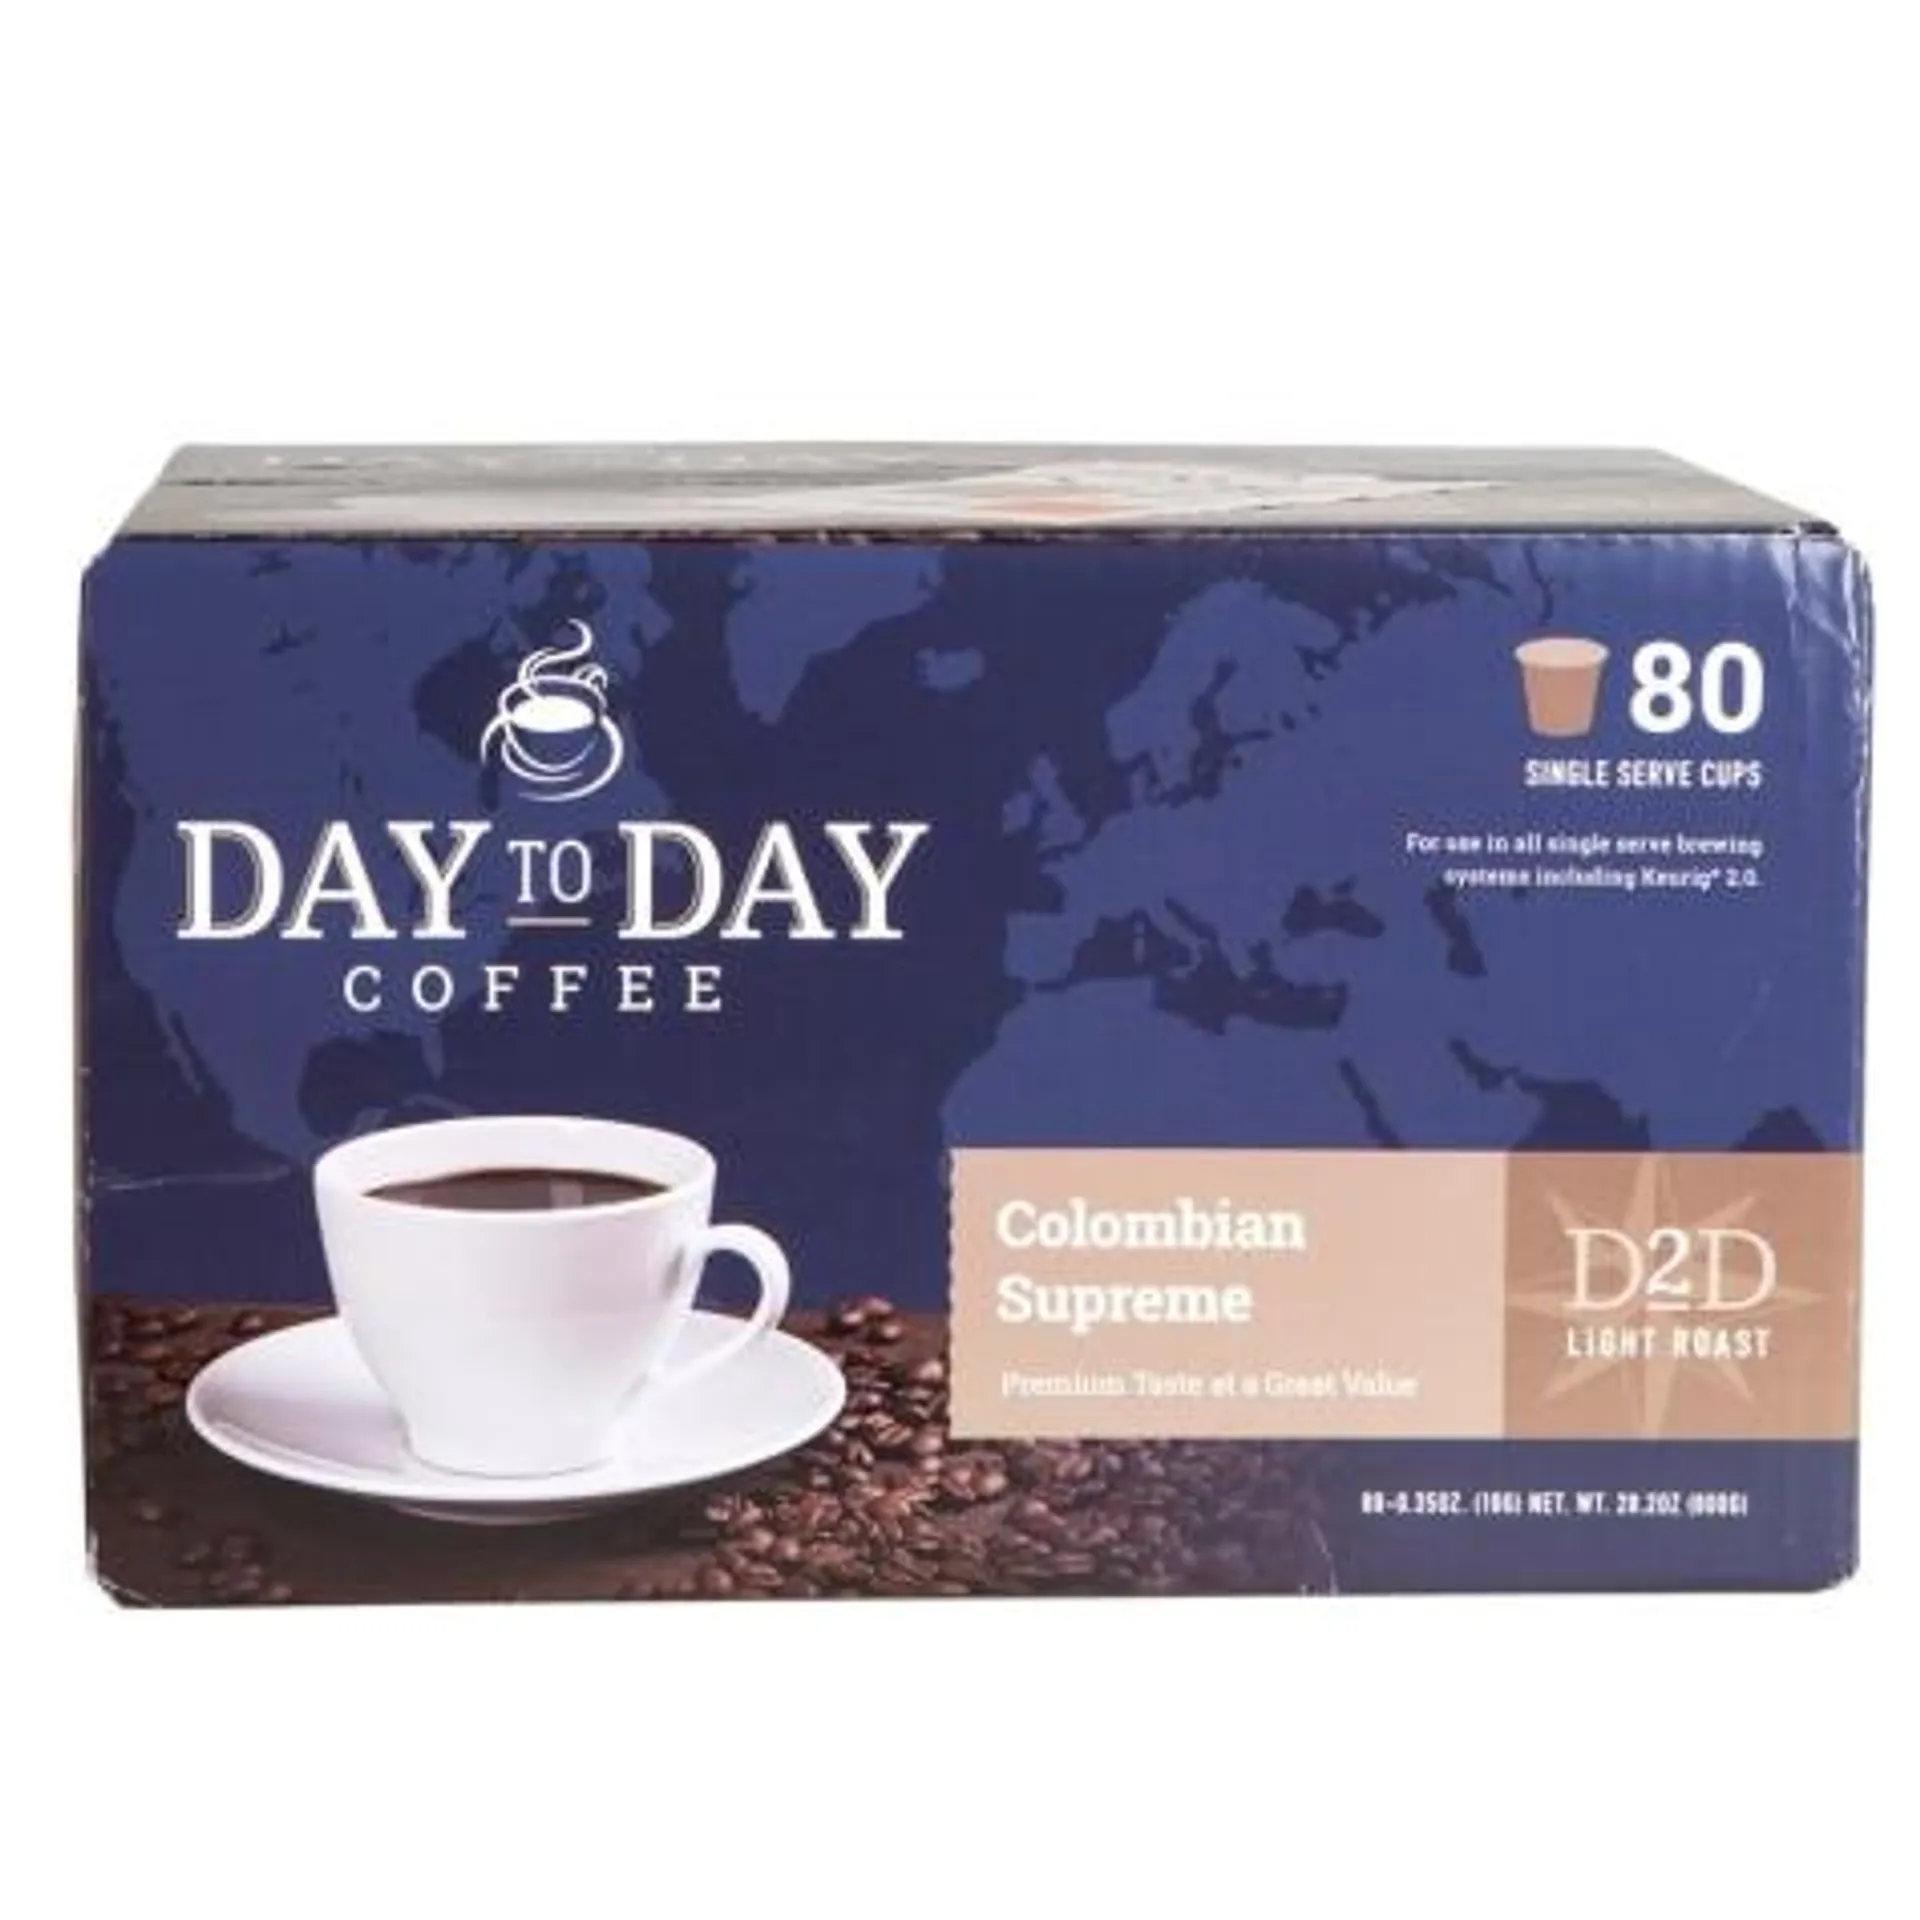 Day to Day Colombian Supreme Coffee, 80 Count